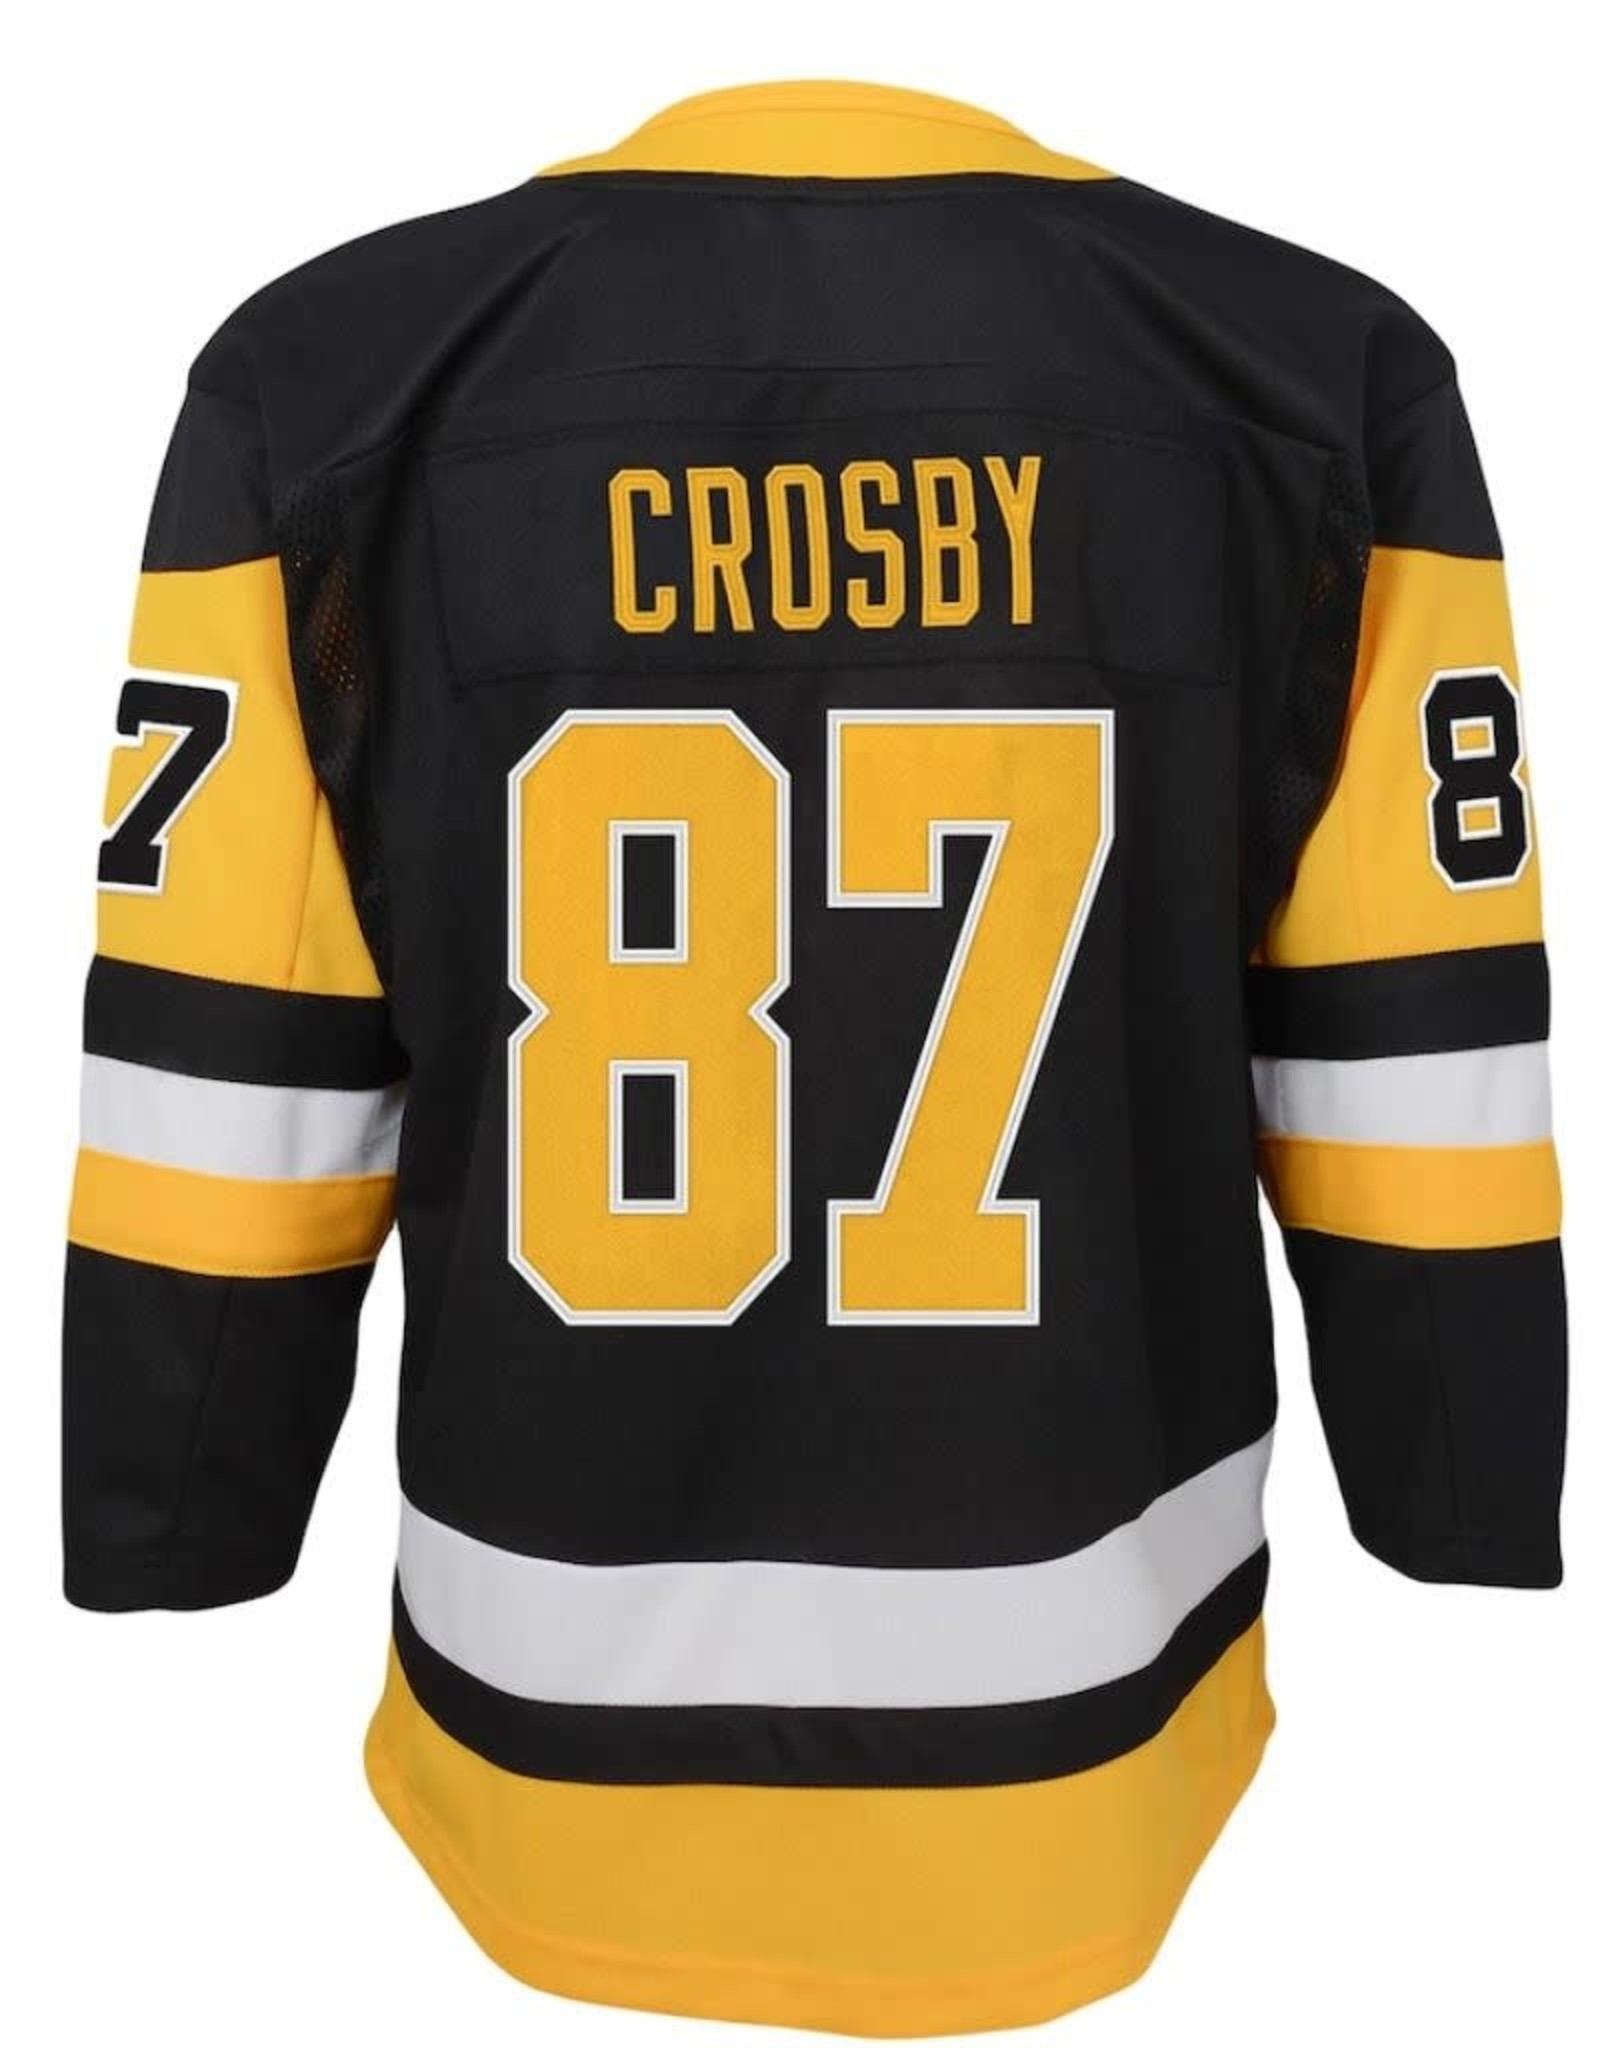 NHL Youth Premier Home Jersey Crosby 